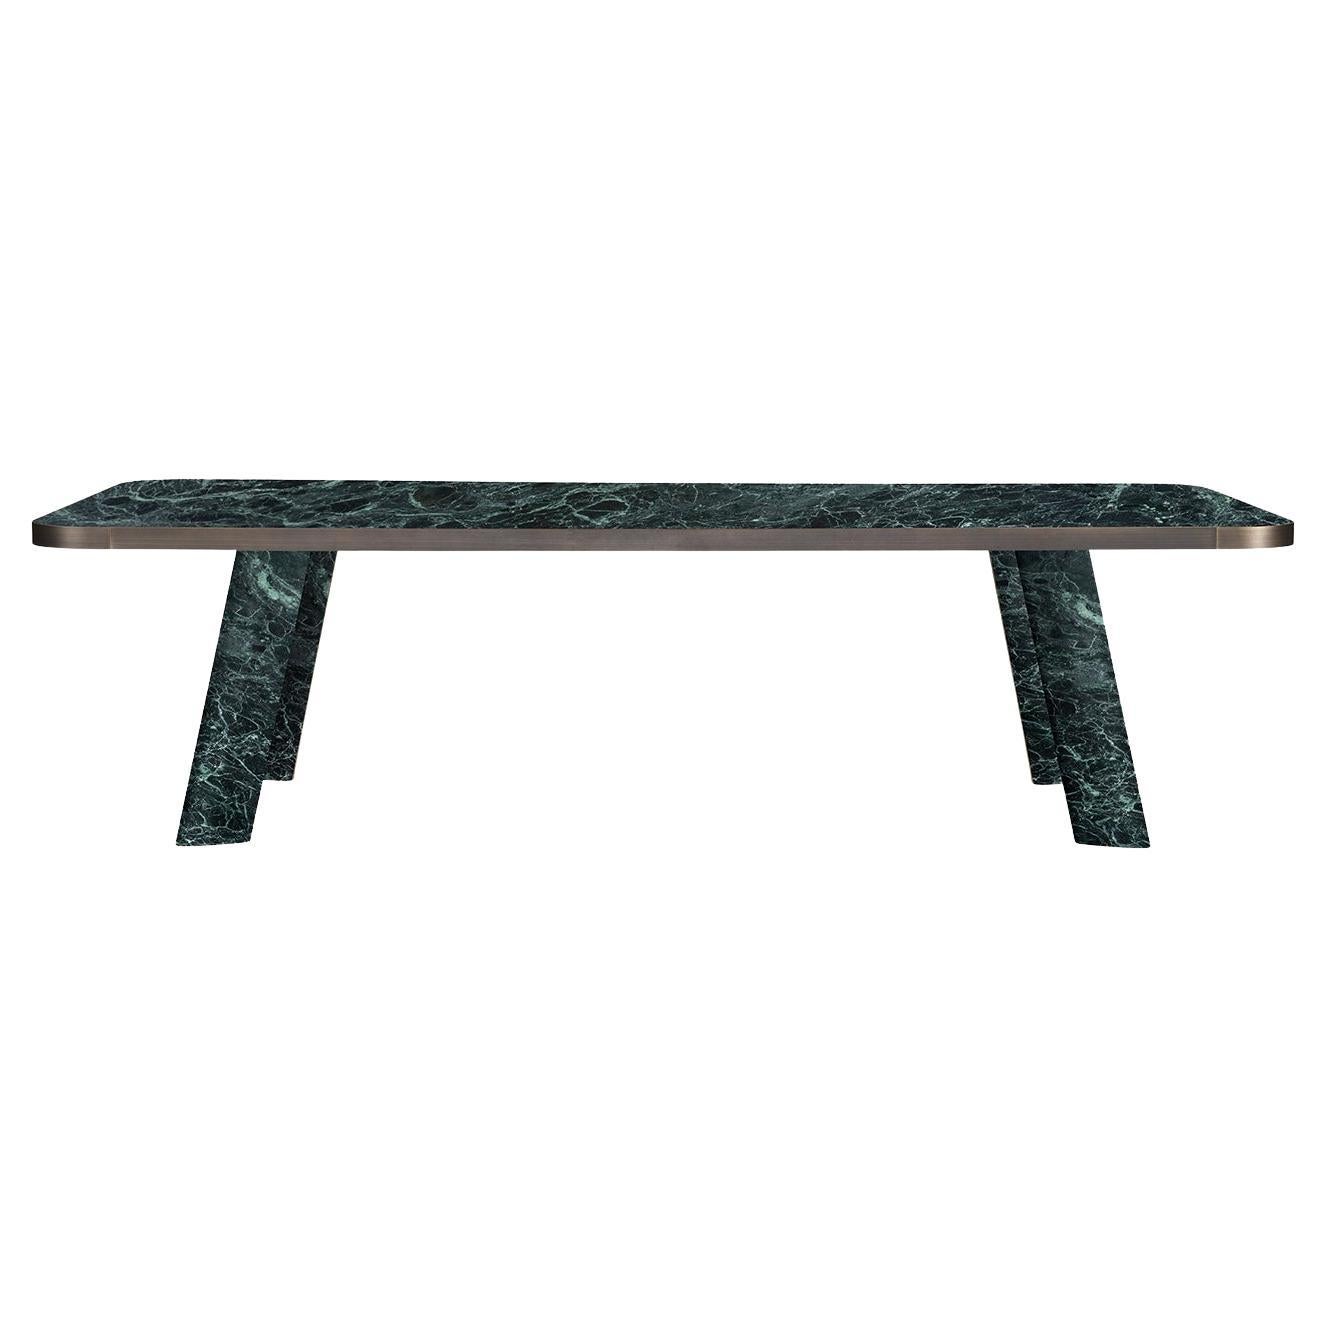 Native Verde Alpi Rectangular Dining Table by Stefano Giovannoni For Sale